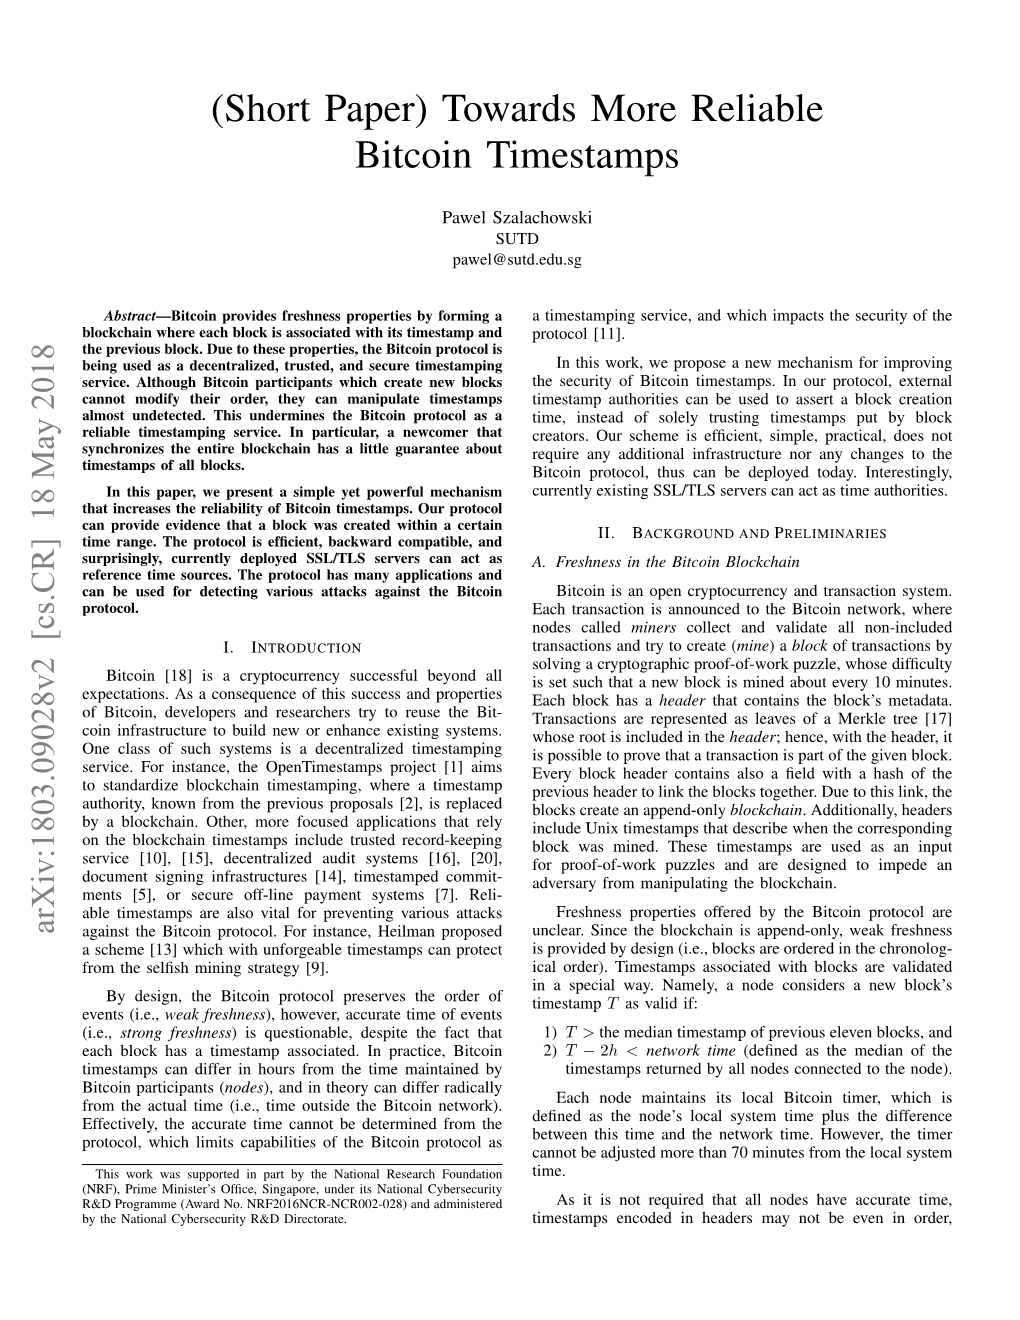 Towards More Reliable Bitcoin Timestamps